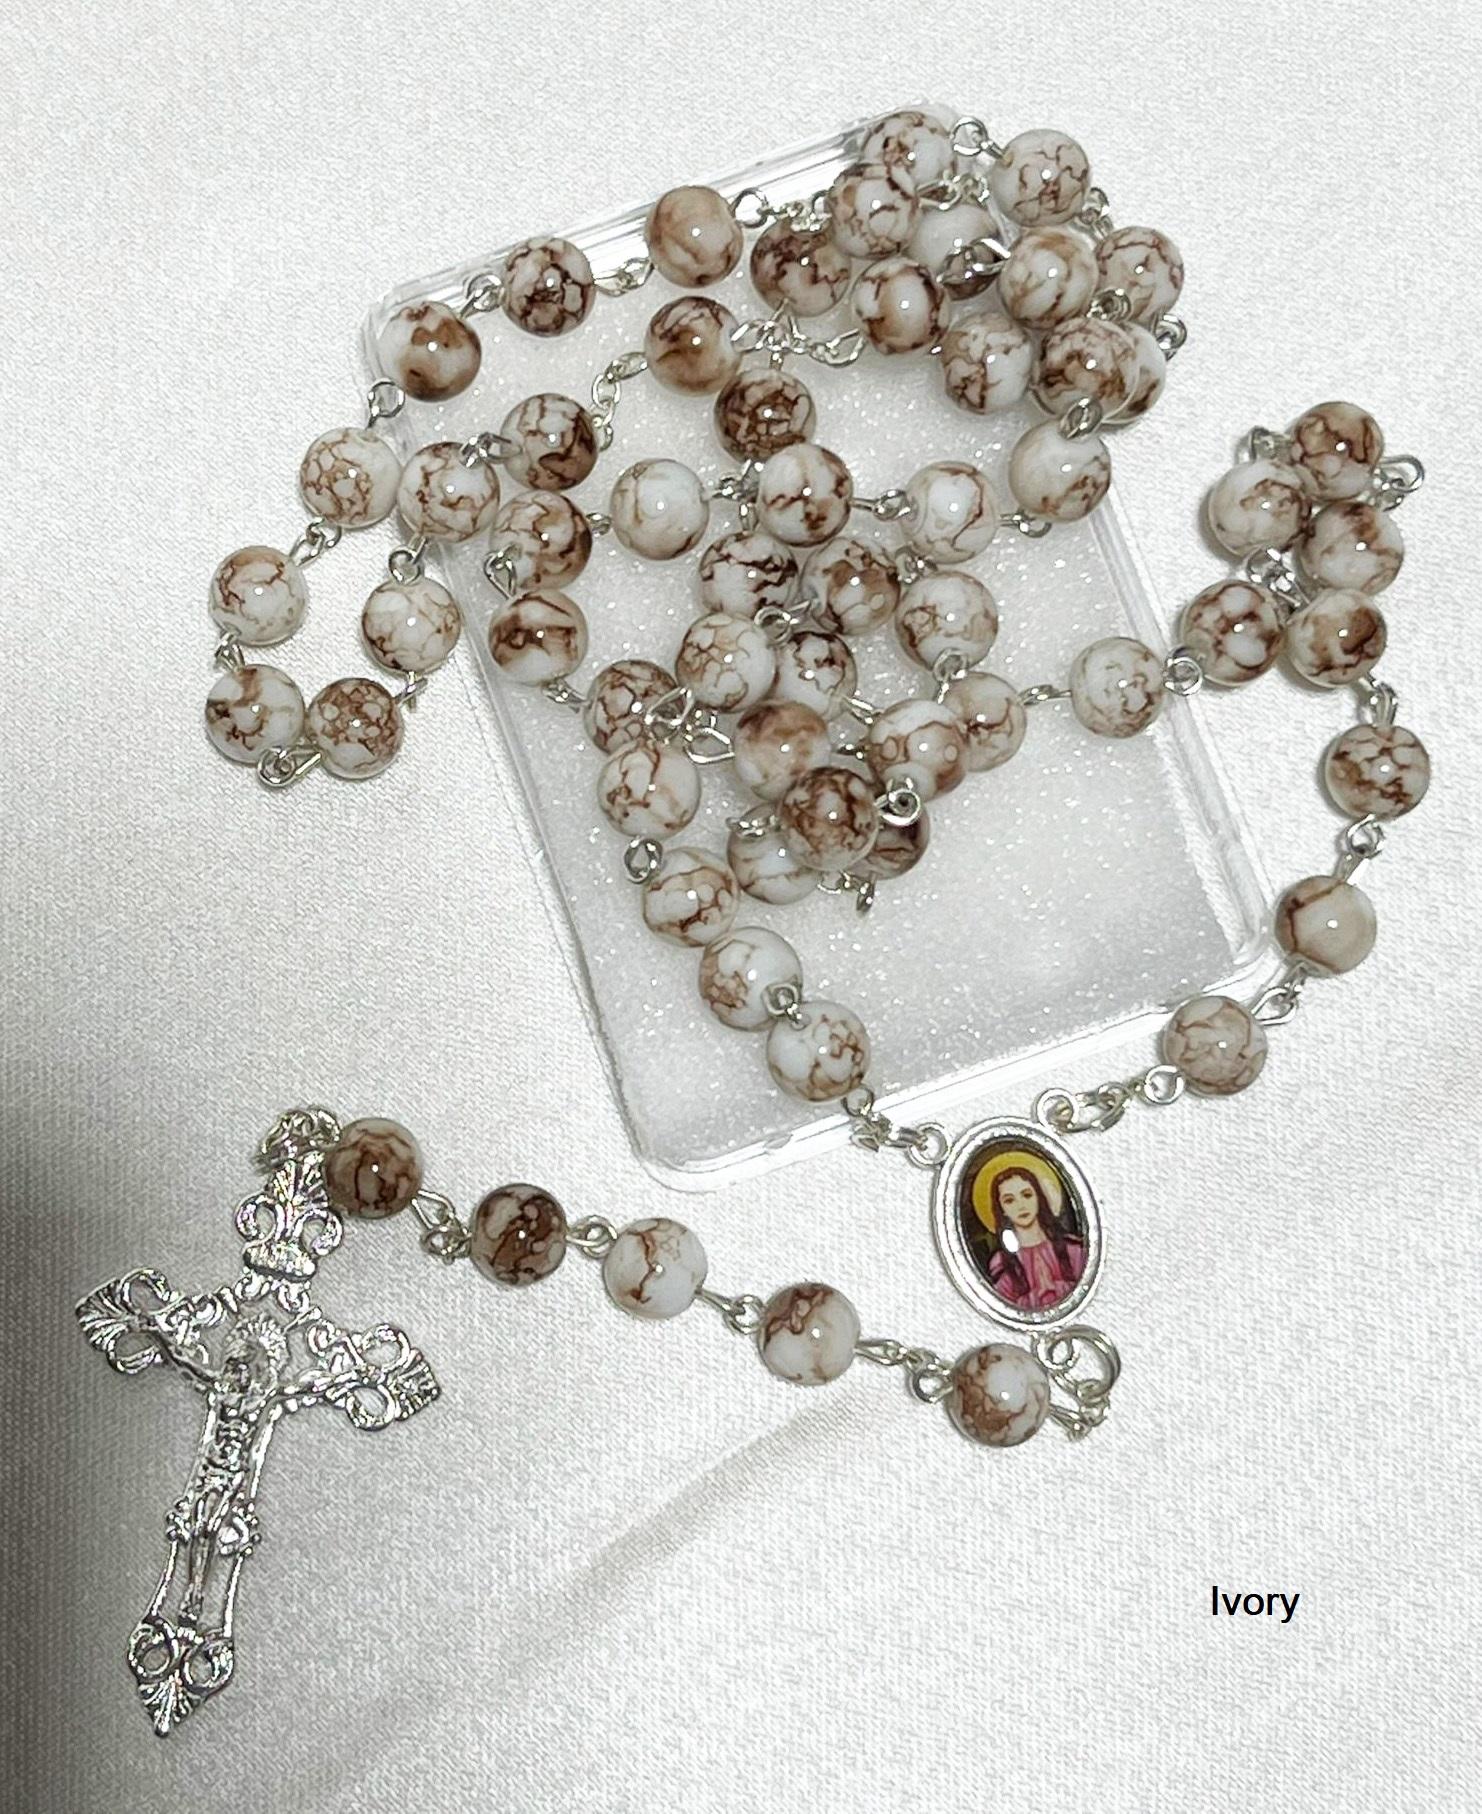 St Philomena rosary beads with worked stones - various colours